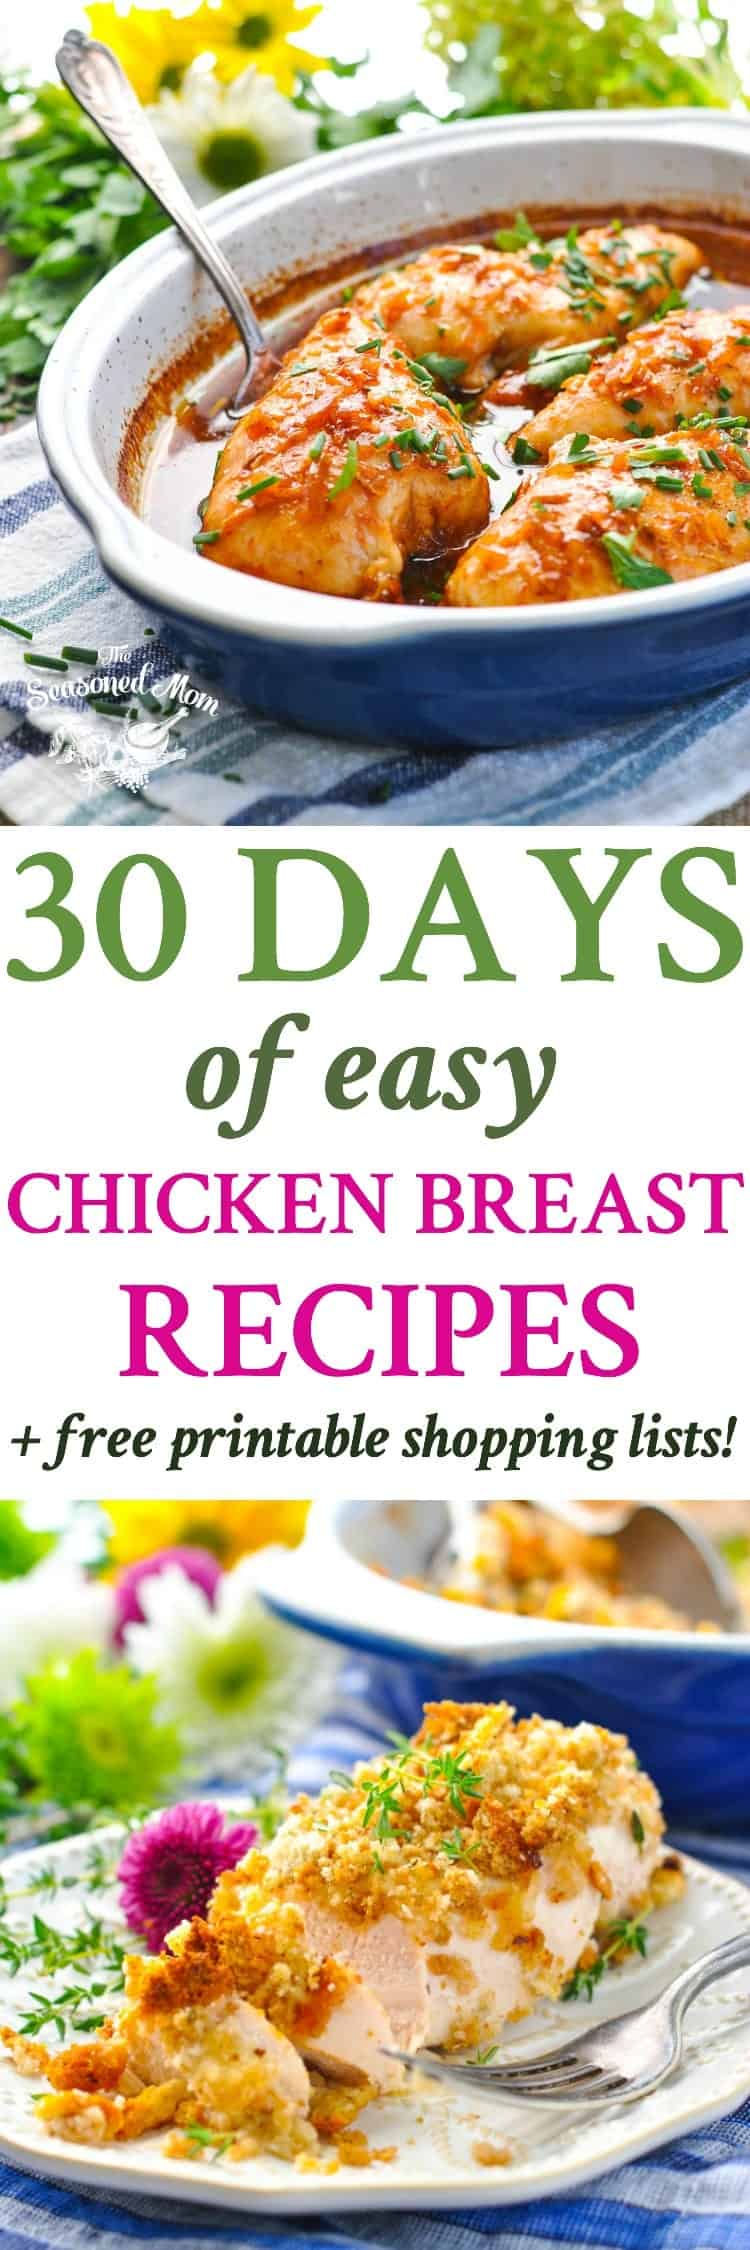 The meal planning is done for you with these 30 Days of Easy Chicken Breast Recipes and printable weekly shopping lists! Chicken Recipes | Easy Dinner Recipes | Dinner Ideas #chicken #dinner #chickenbreast